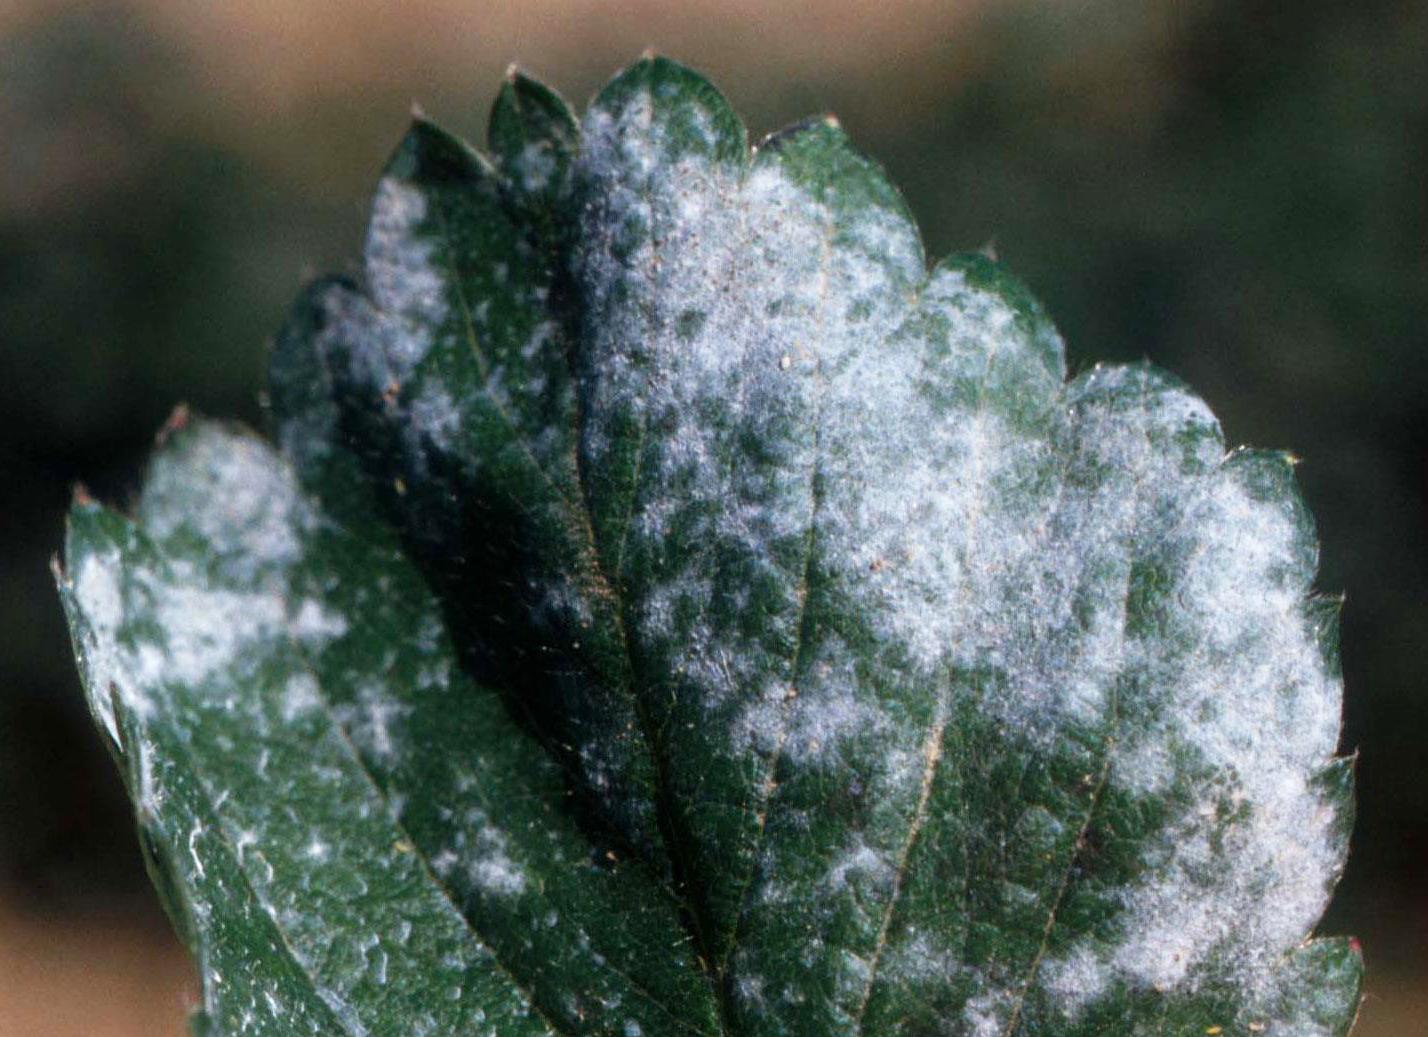 Close-up image of a plant leaf infected with powdery mildew